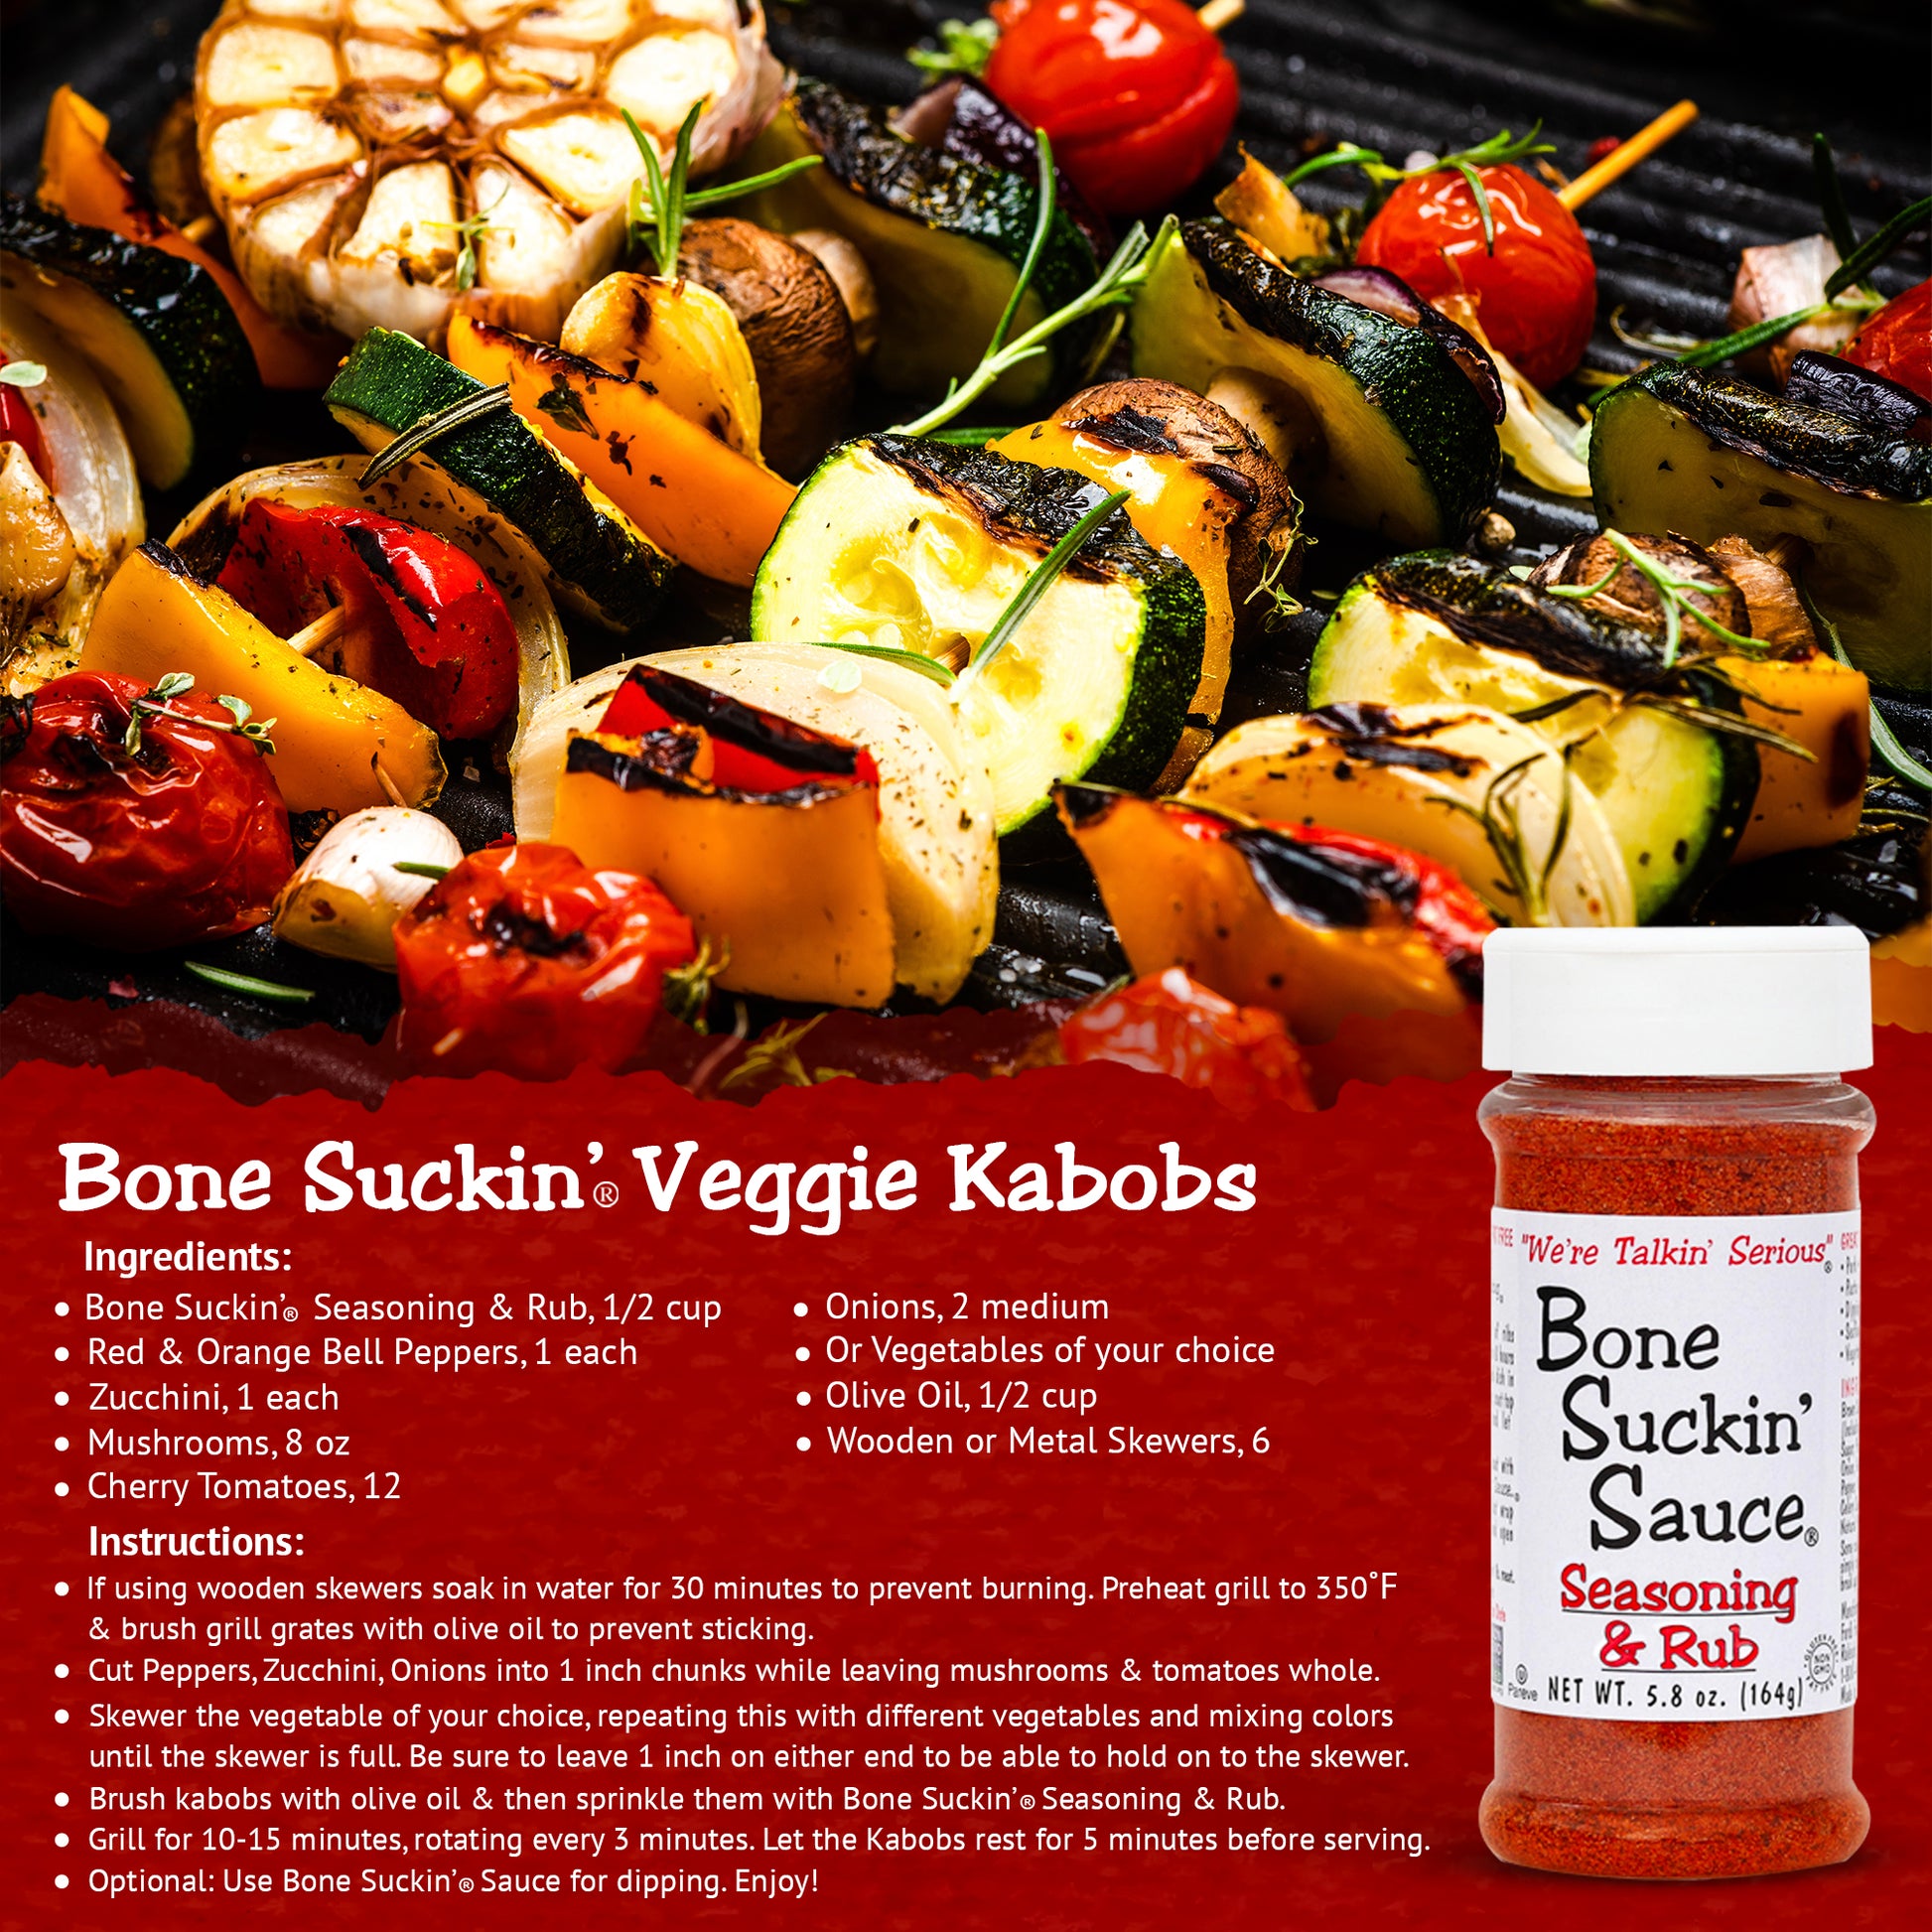 Bone Suckin' Seasoning & Rub Grilled Veggie Kabobs Recipe. Ingredients: Bone Suckin' Seasoning & Rub, 1/2 cup. Veggies of your choice (bell peppers, onions, etc). 1/2 cup olive oil. 6 wooden/metal skewers. Instructions: If using wooden skewers, soak in water for 30 min. Preheat grill to 350. Brush grill grates with olive oil. Cut veggies into chunks as needed. Skewer any veggie until skewer is full. Brush kabobs with olive oil, sprinkle with Bone Suckin' Seasoning & Rub. Grill 10-15 minutes.